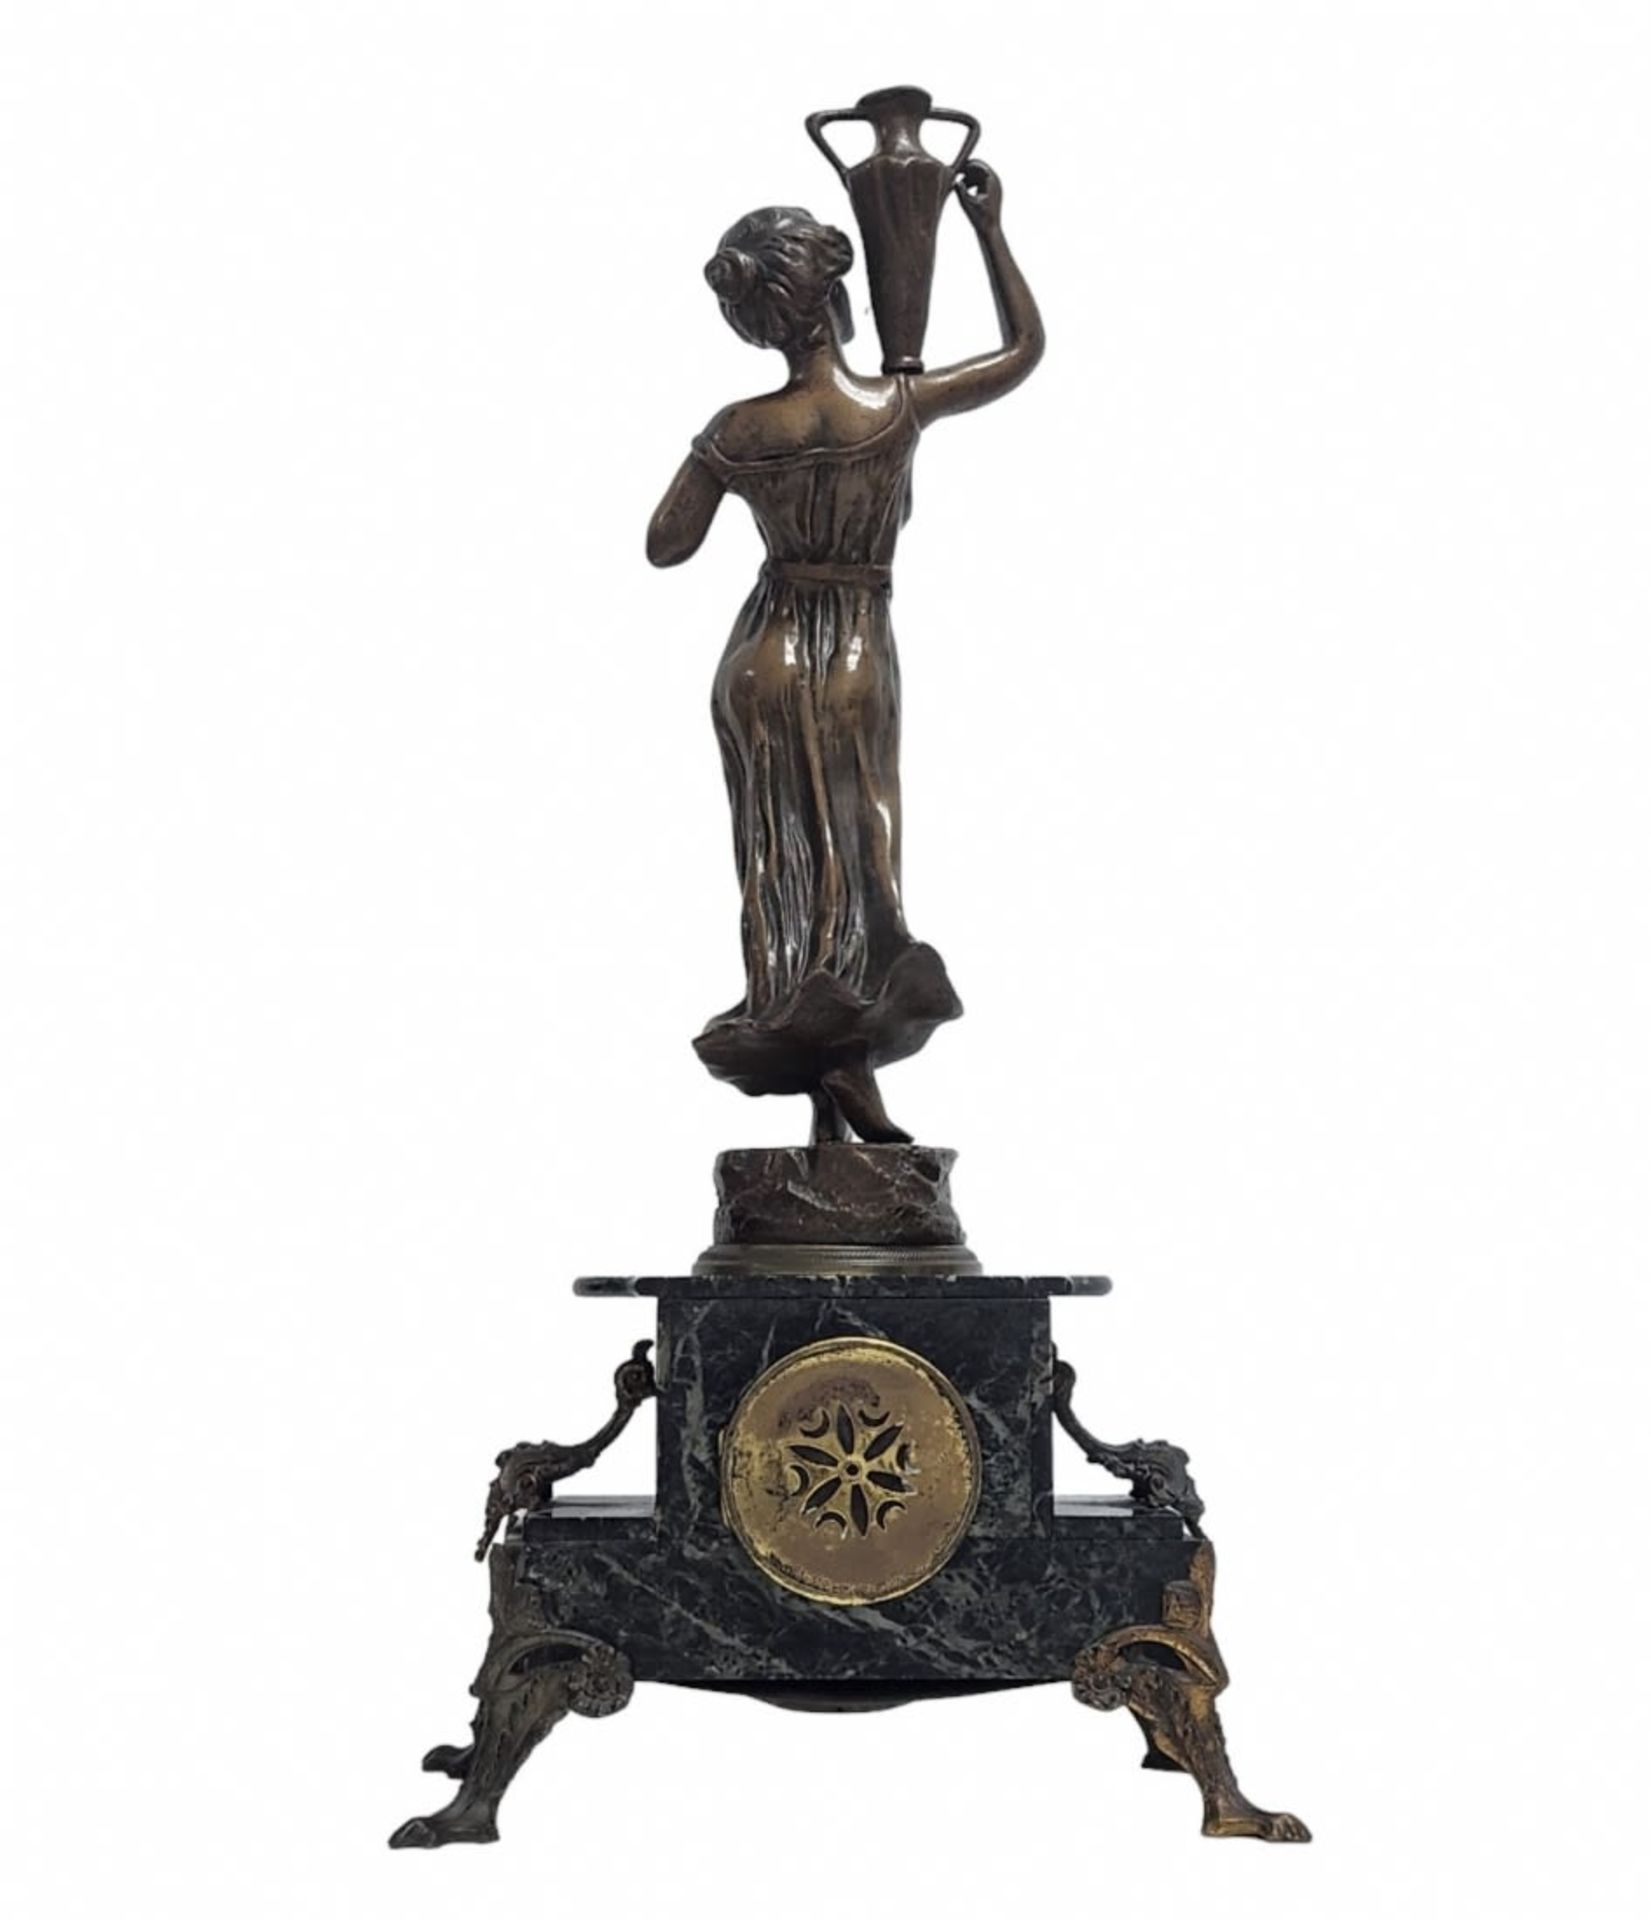 Antique French mantle clock, 19th century, made of mottled Egyptian granite marble and Spelter, - Image 3 of 11